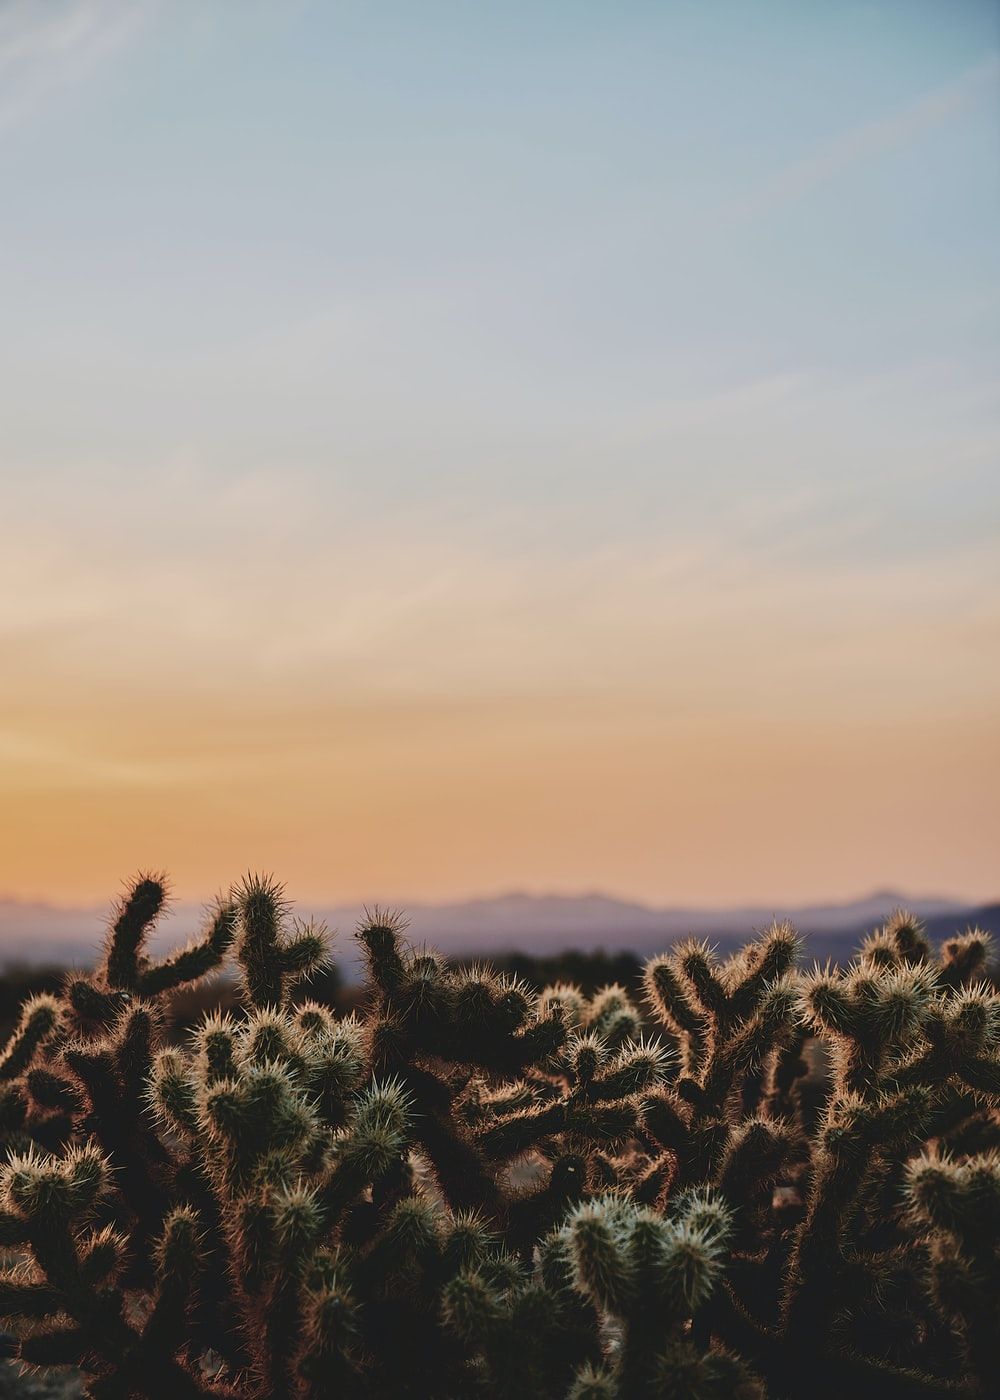 Desert Sunset Picture. Download Free Image